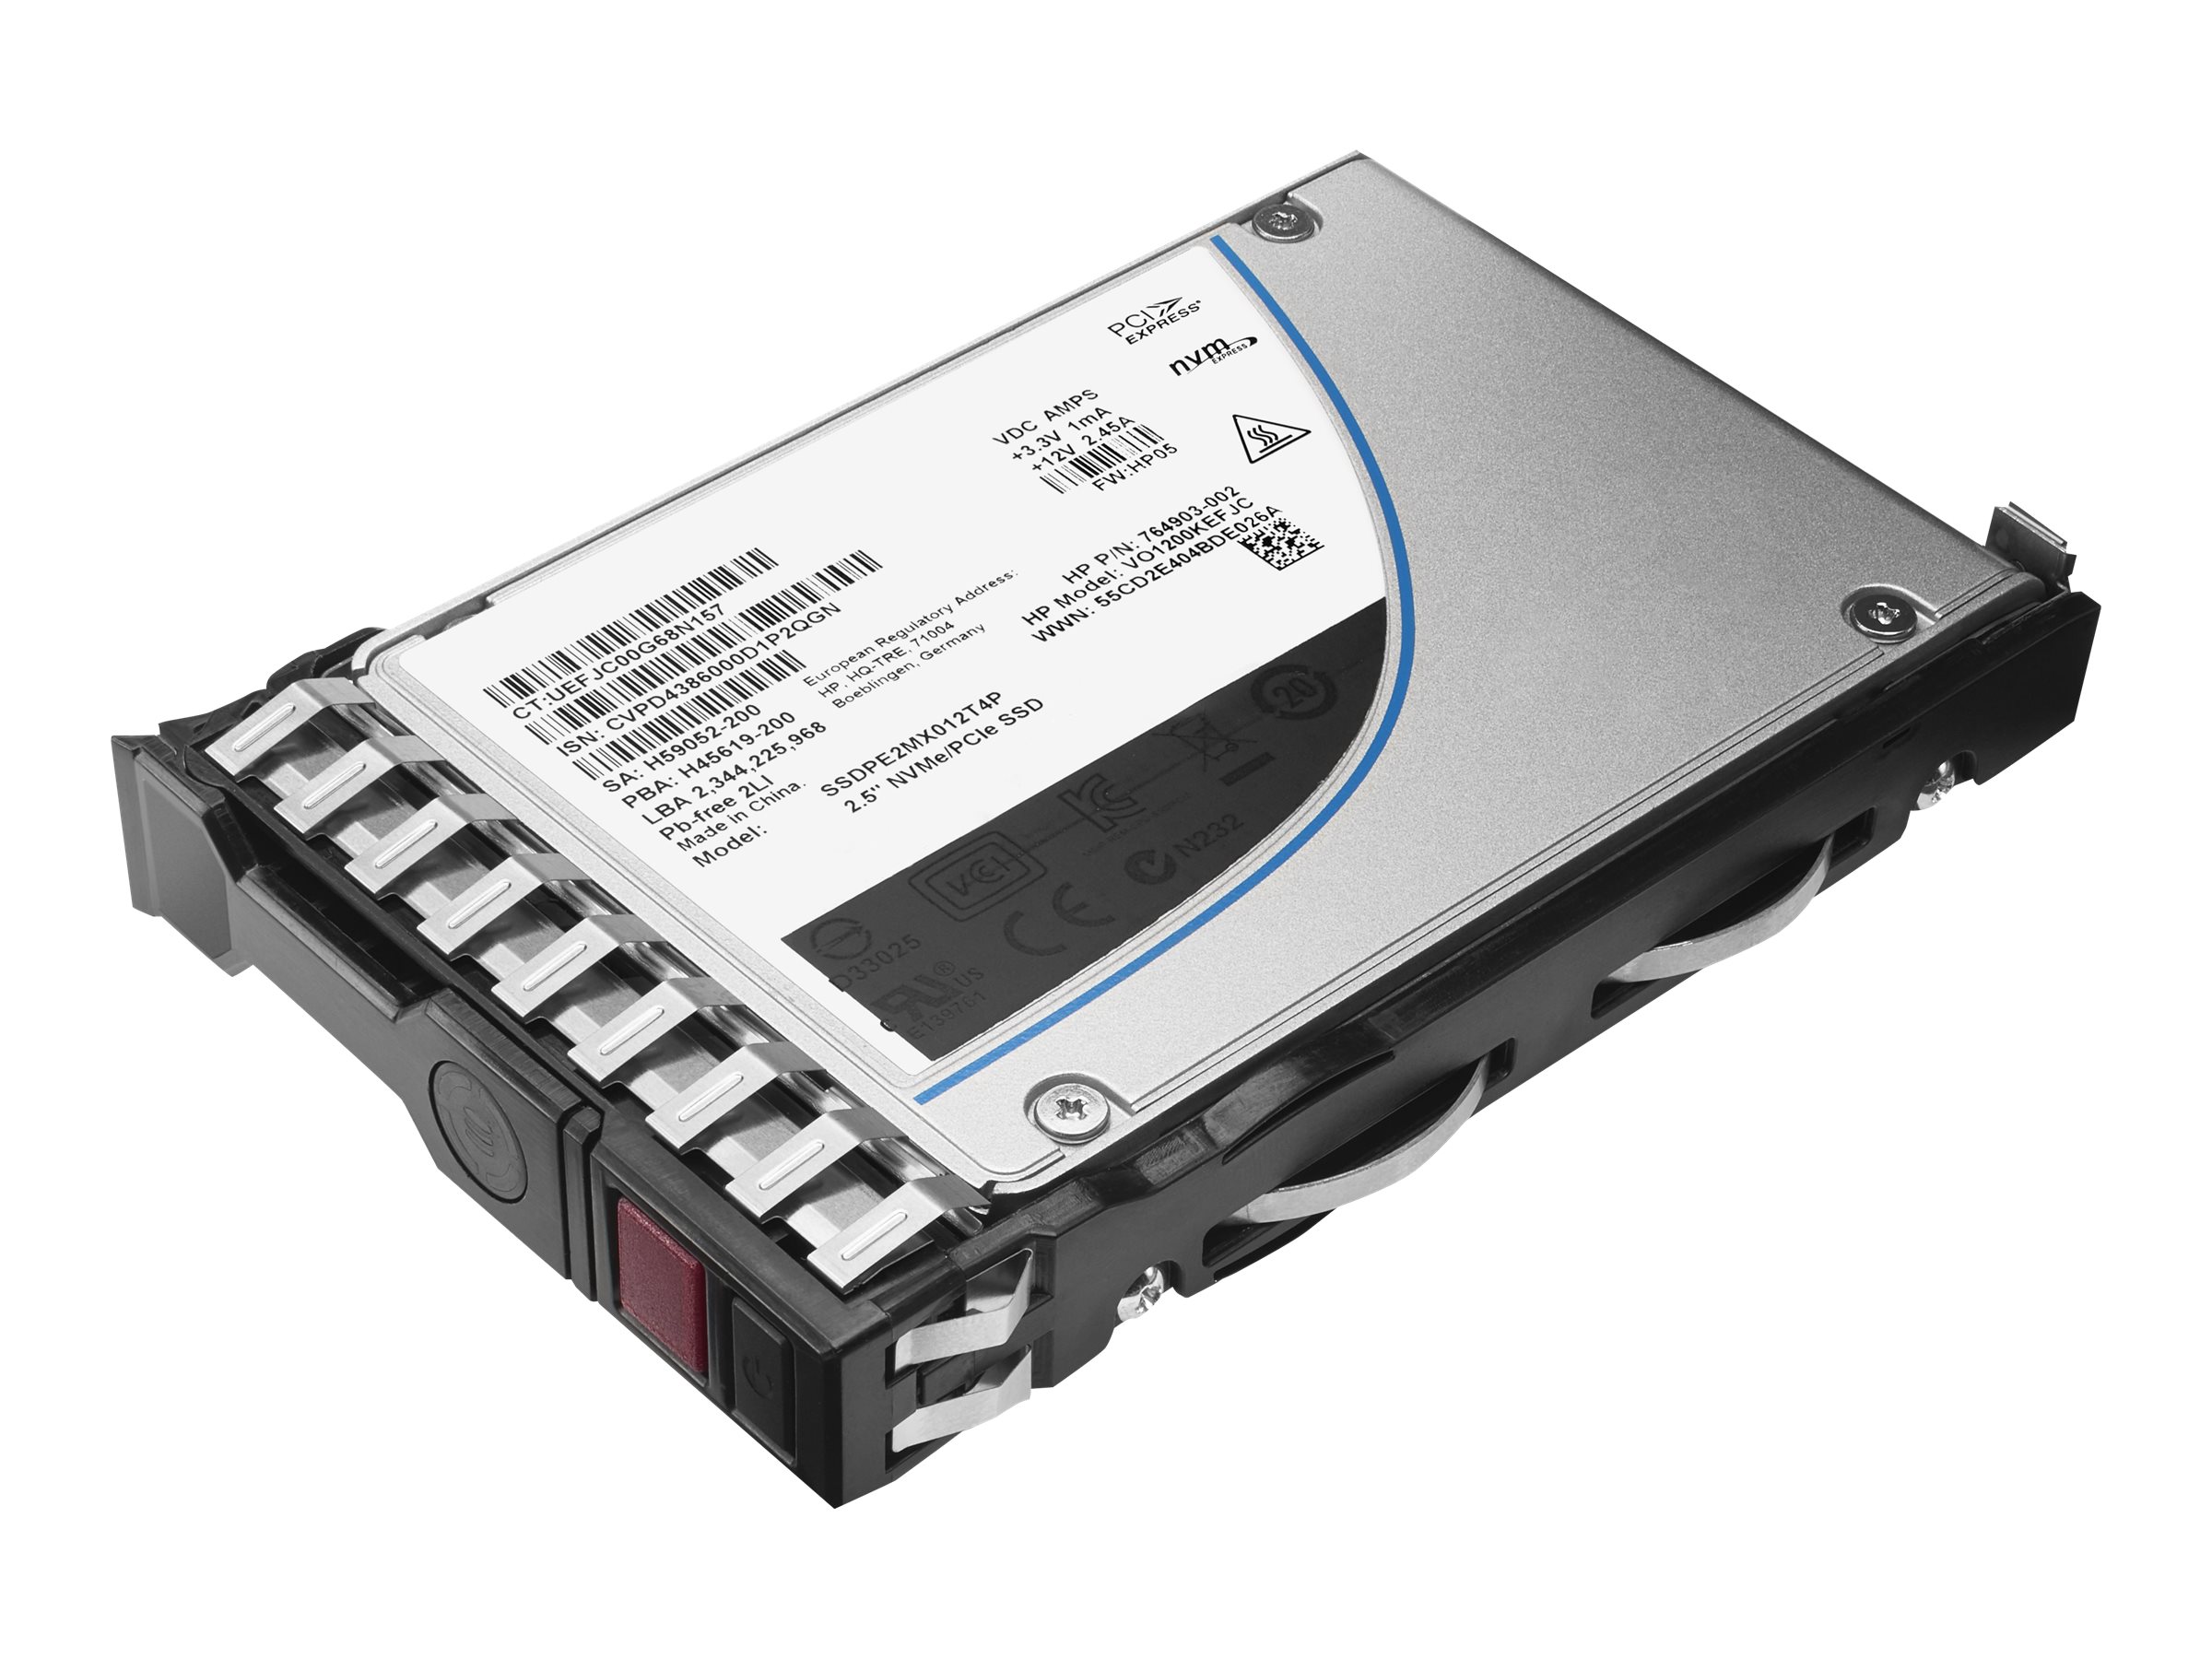 HPE Mixed Use-2 - SSD - 200 GB - Hot-Swap - 3.5